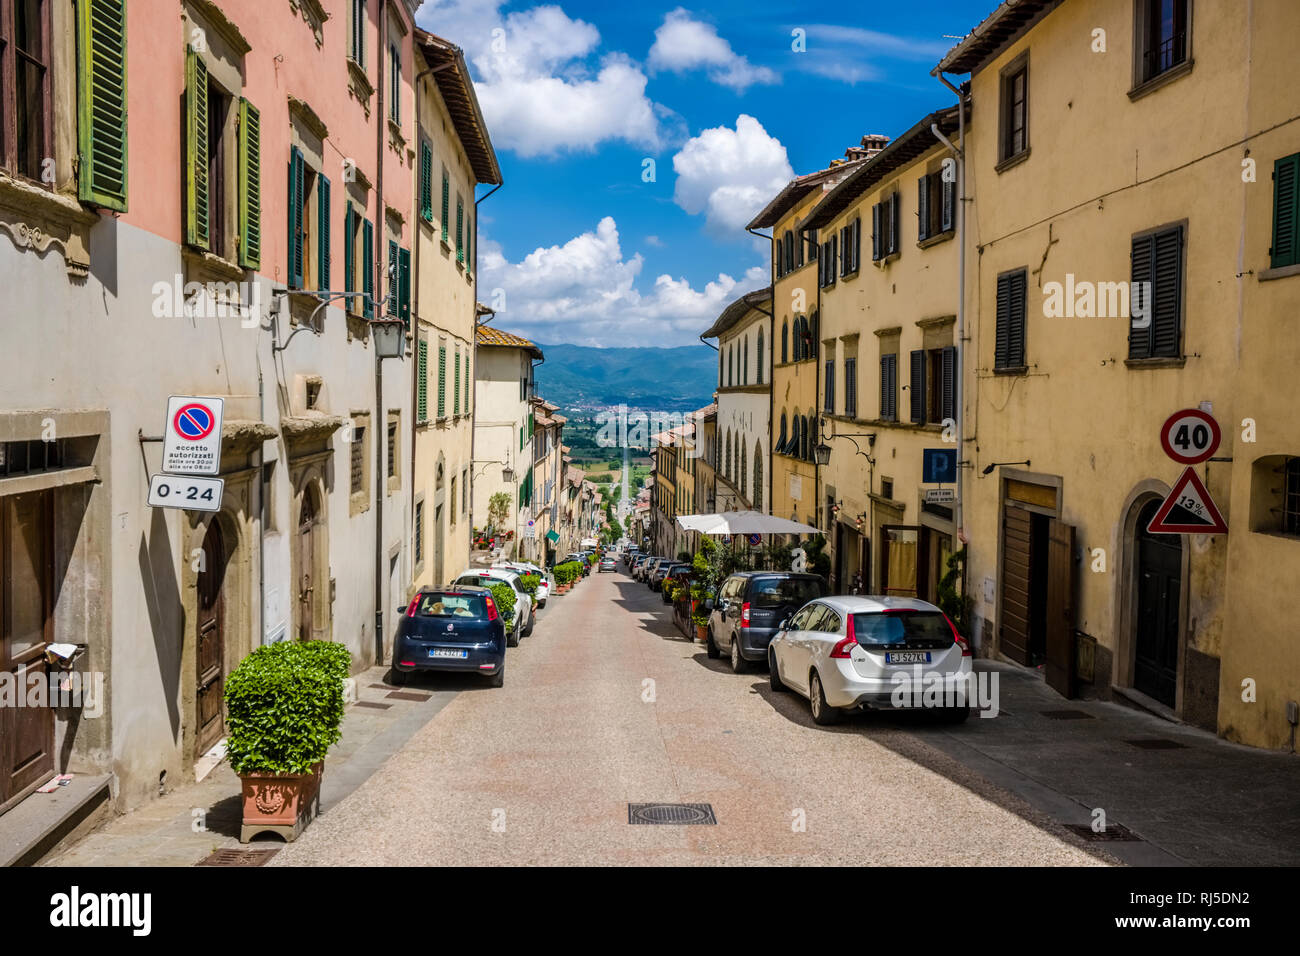 Straight road leading down from medieval town to typical hilly Tuscan countryside with fields and trees Stock Photo